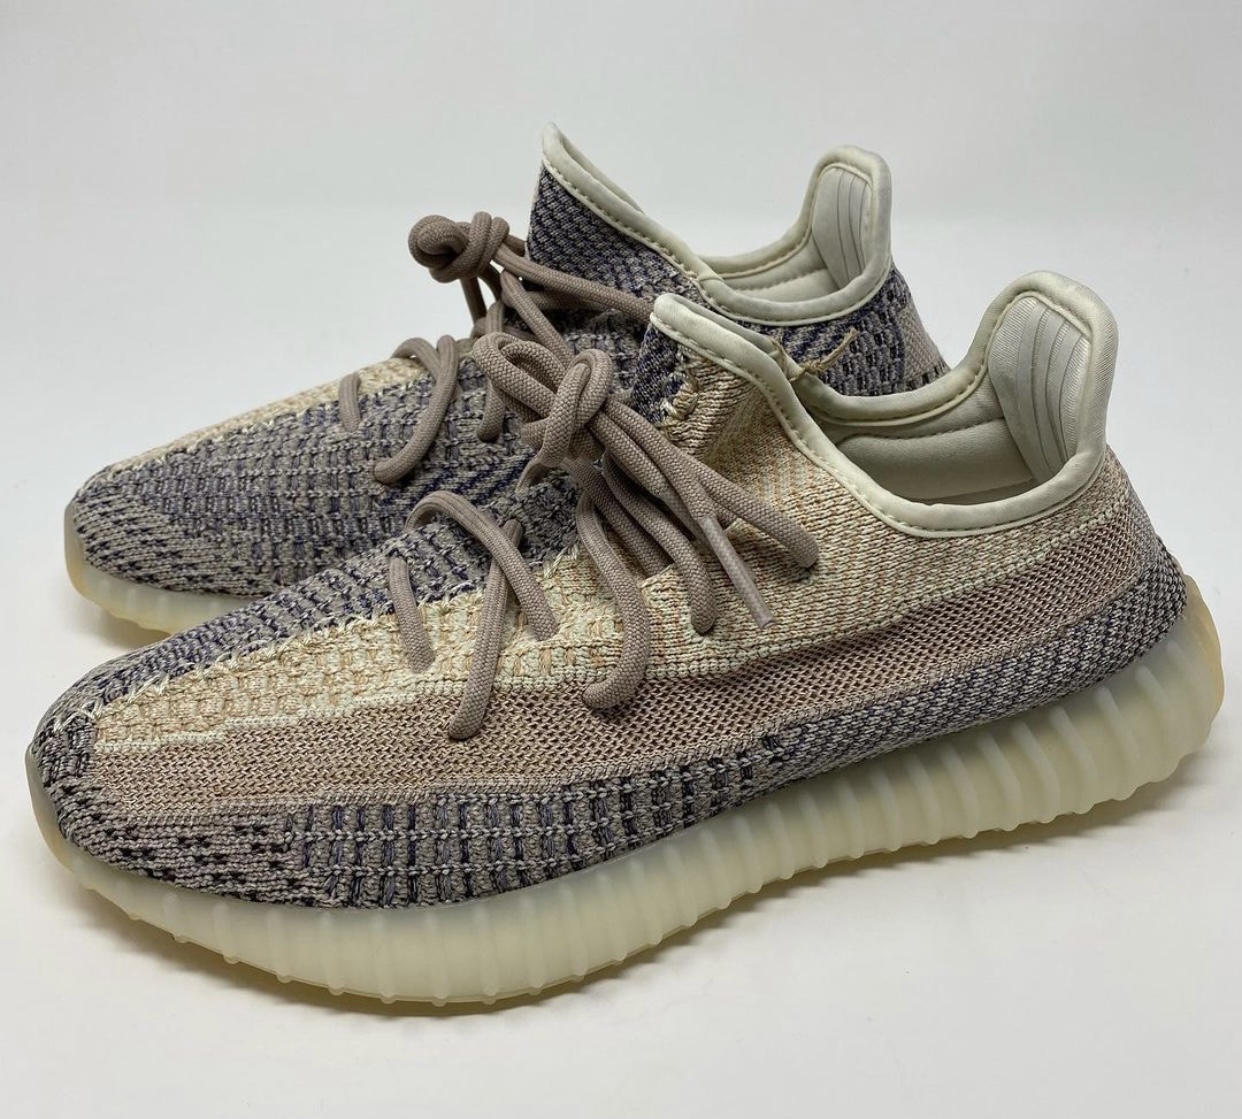 adidas Yeezy Boost 350 V2 Ash Pearl GY7658 Release Date